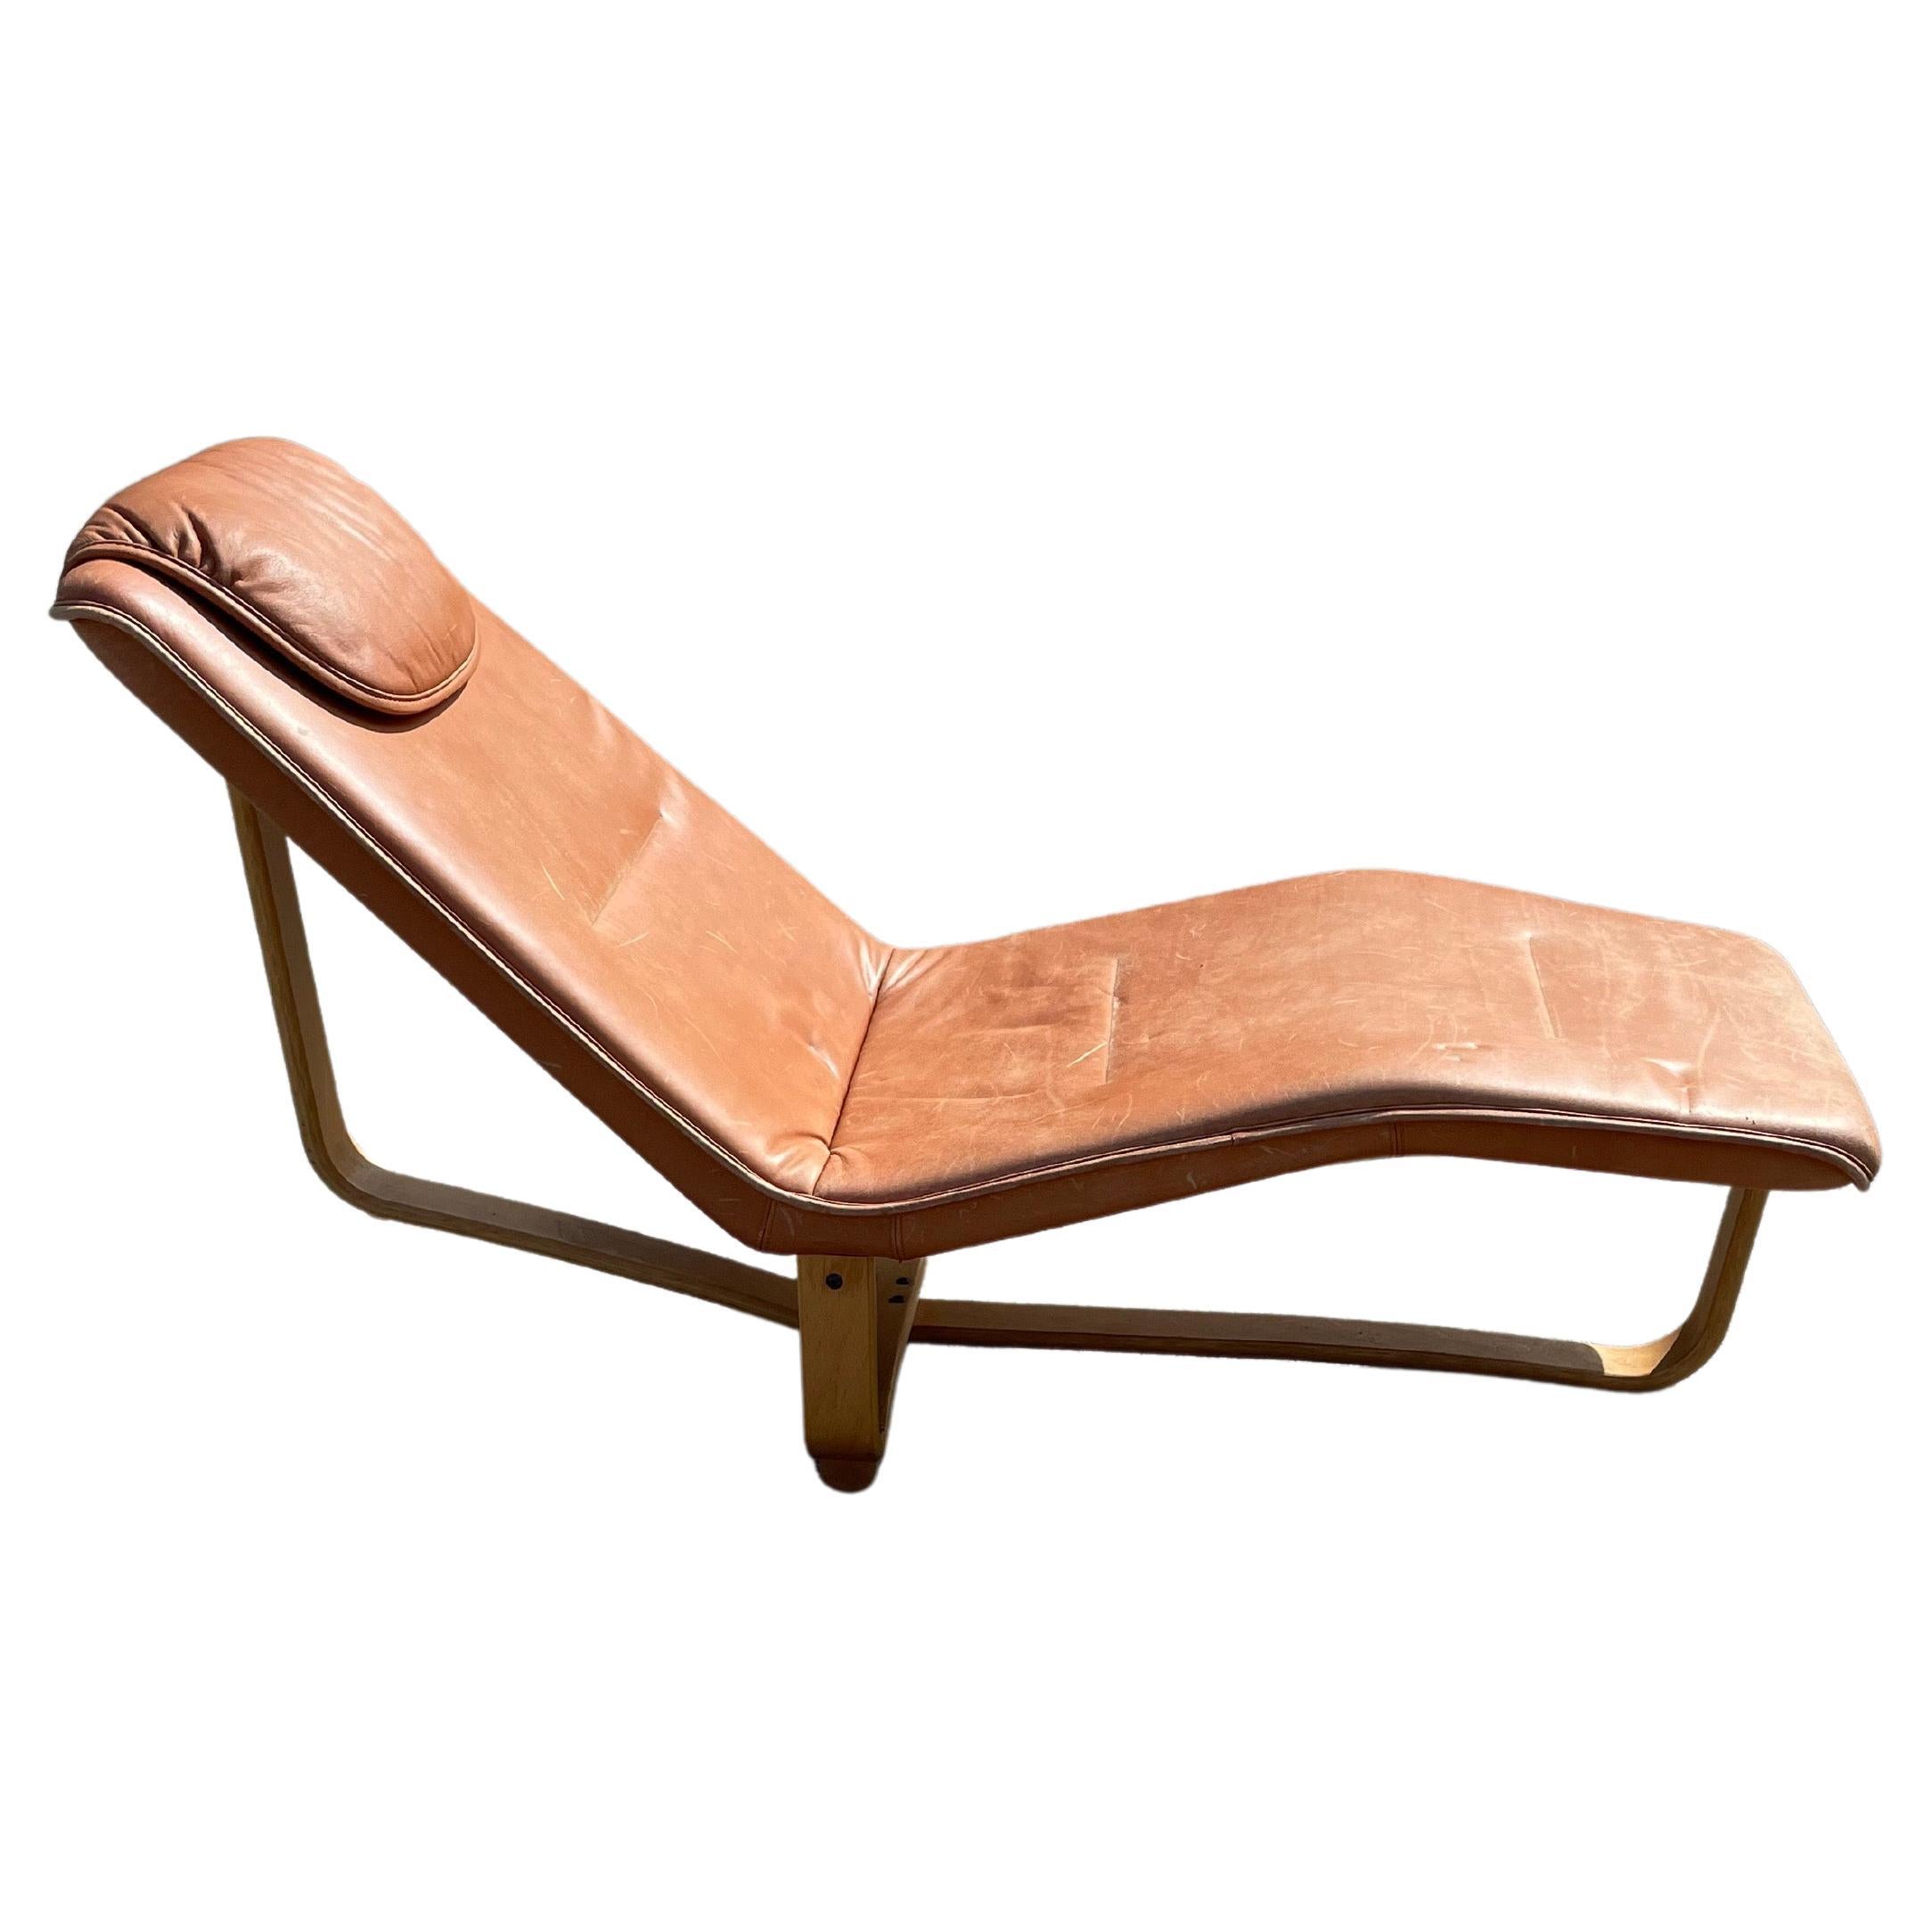 Mid-Century Modern Chaise Longue by Ingmar & Knut Relling for Westnofa